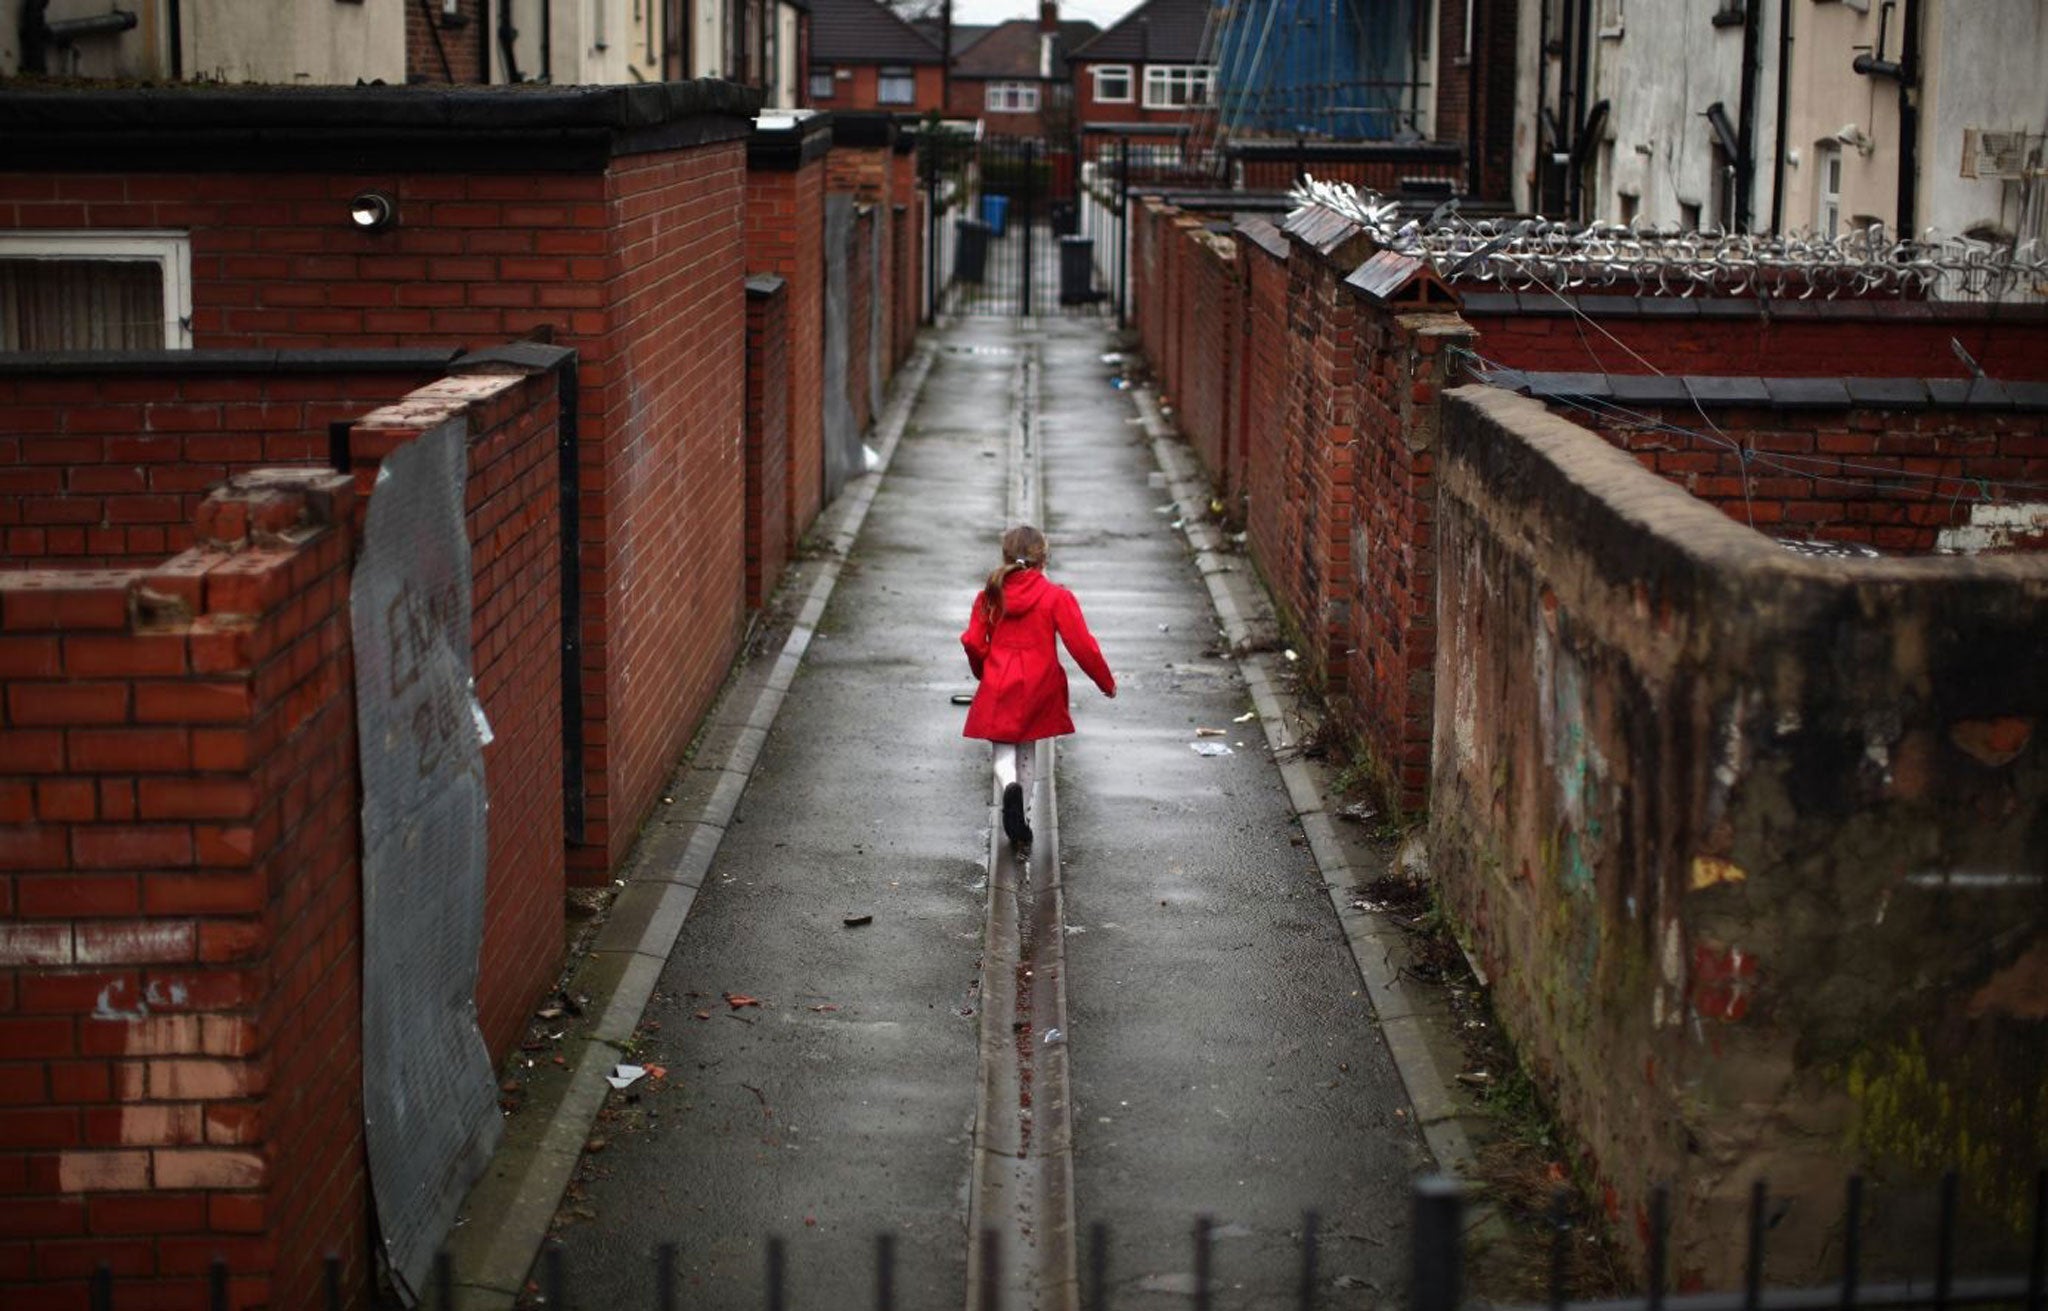 Some 3.6 million children are living in poverty in the UK